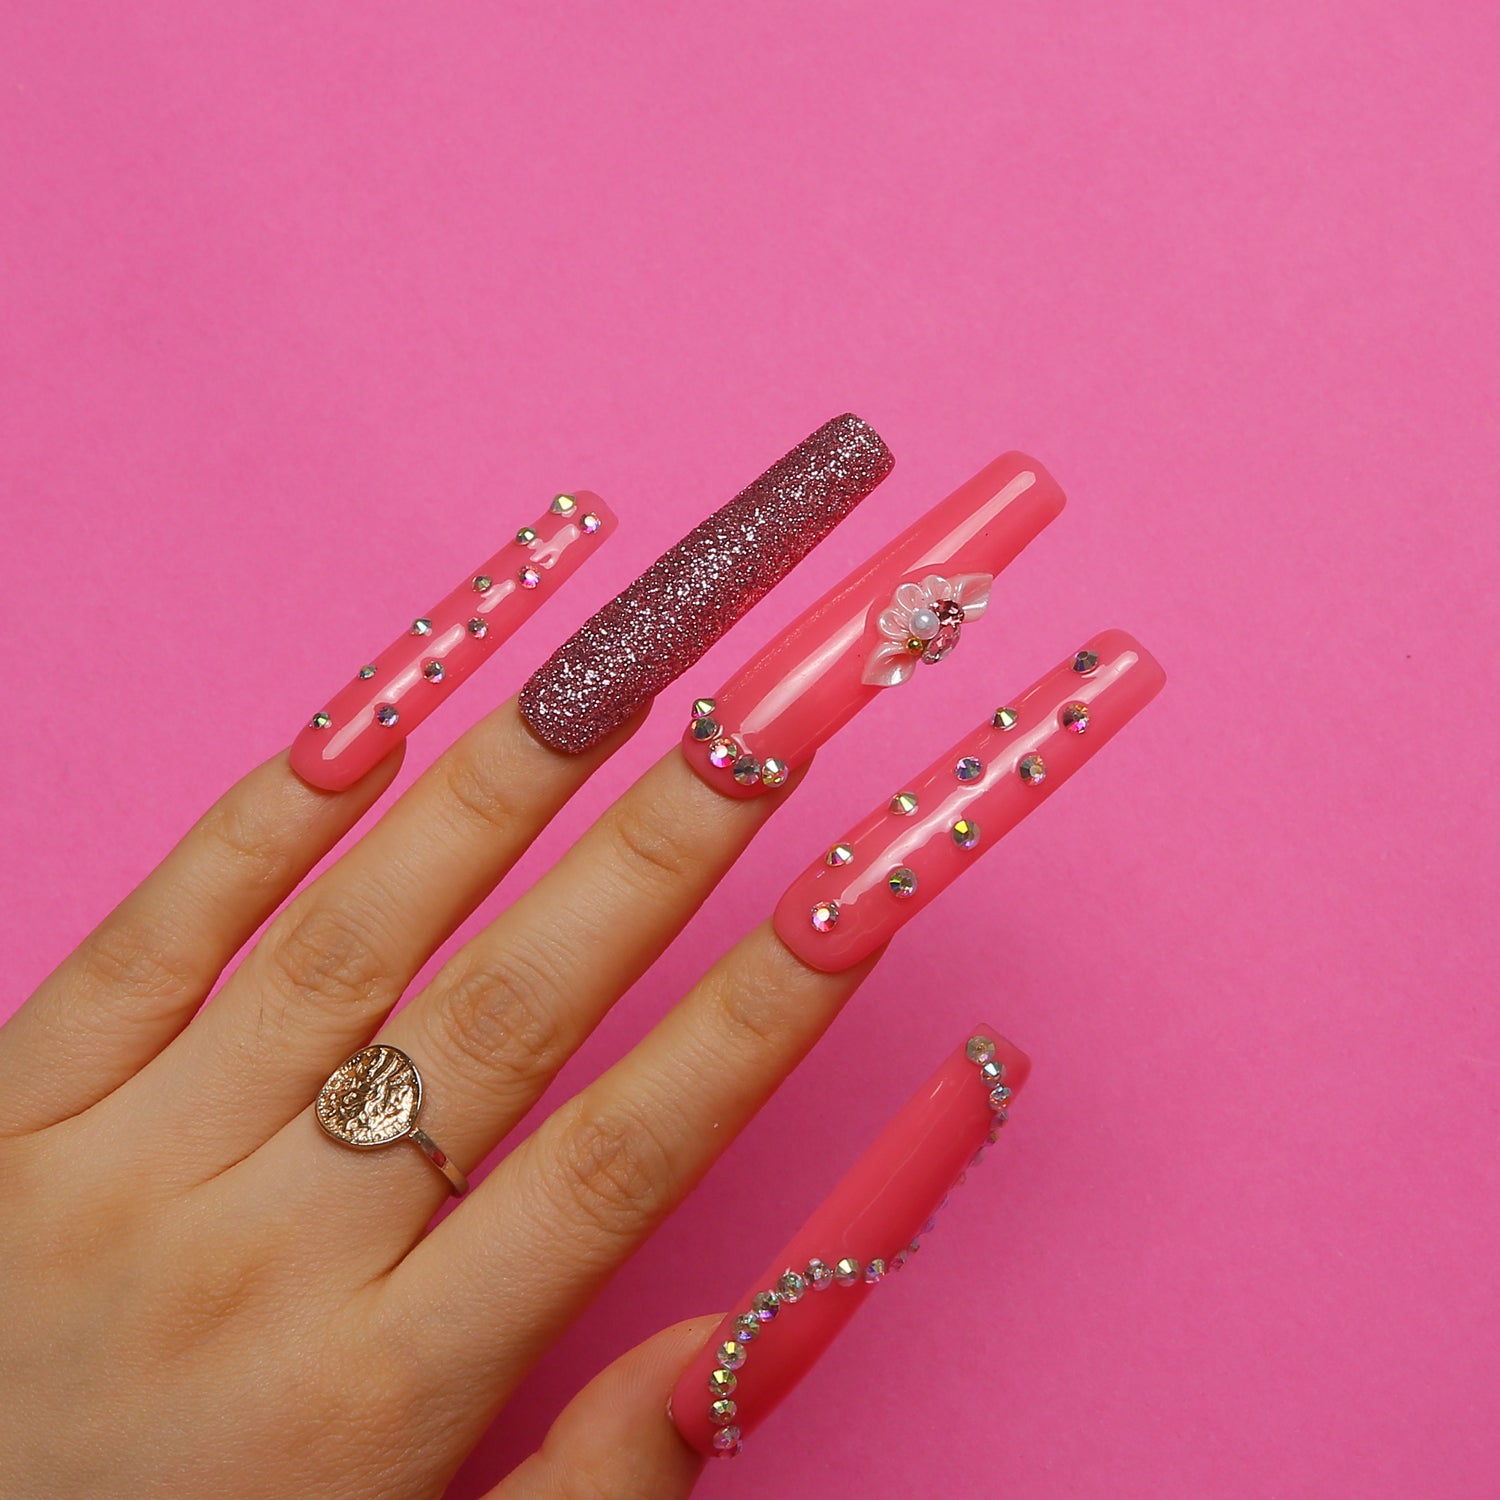 Hand with long, hot pink press-on nails featuring glitter, rhinestones, and a flower blossom on a pink background, highlighting elegance and playfulness.